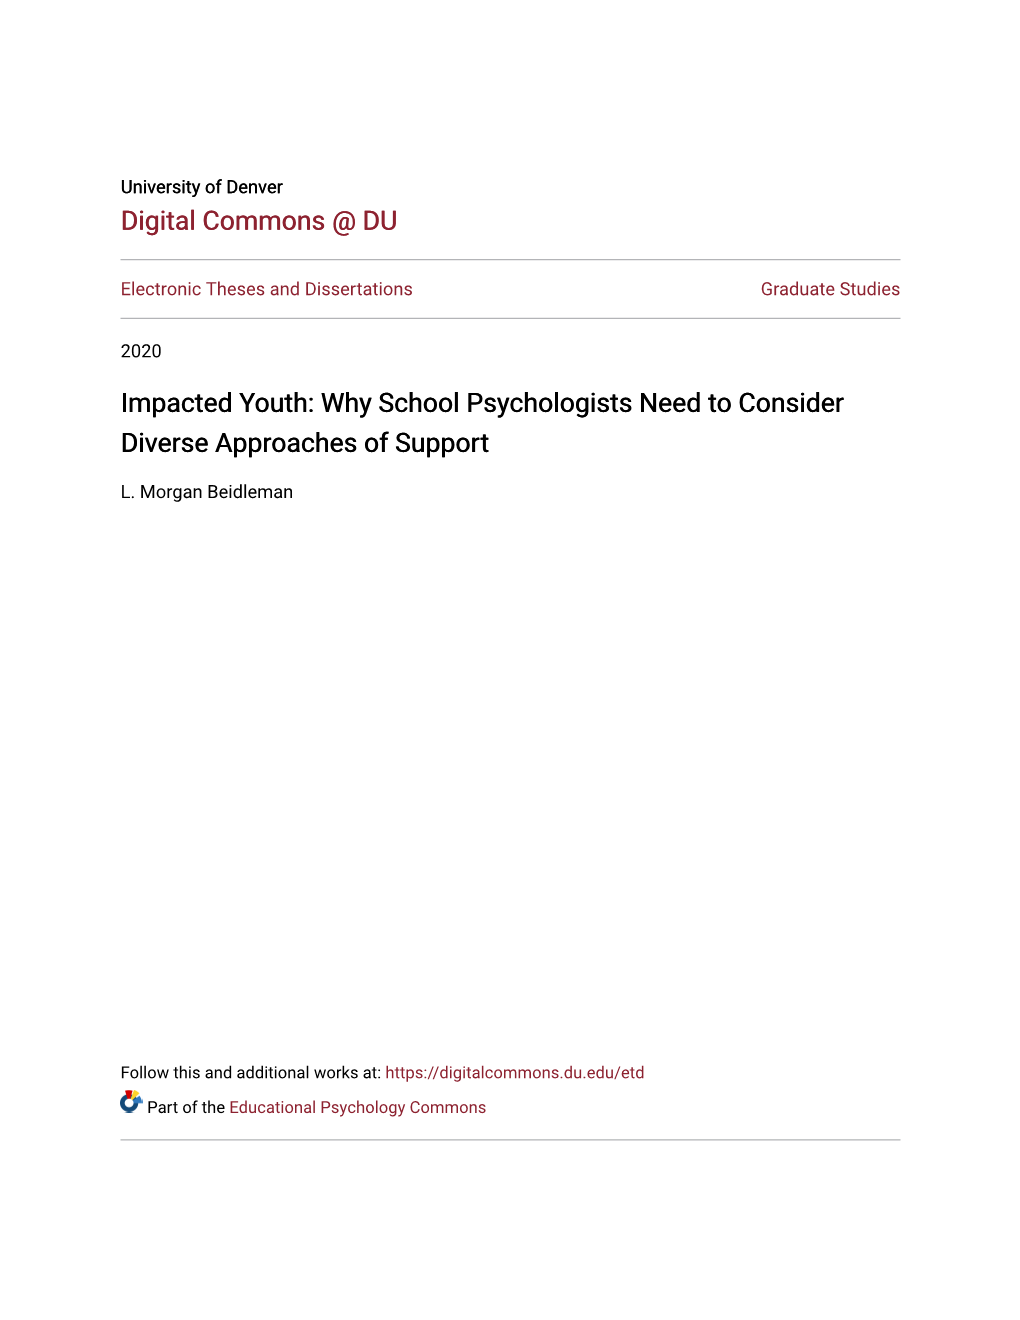 Impacted Youth: Why School Psychologists Need to Consider Diverse Approaches of Support